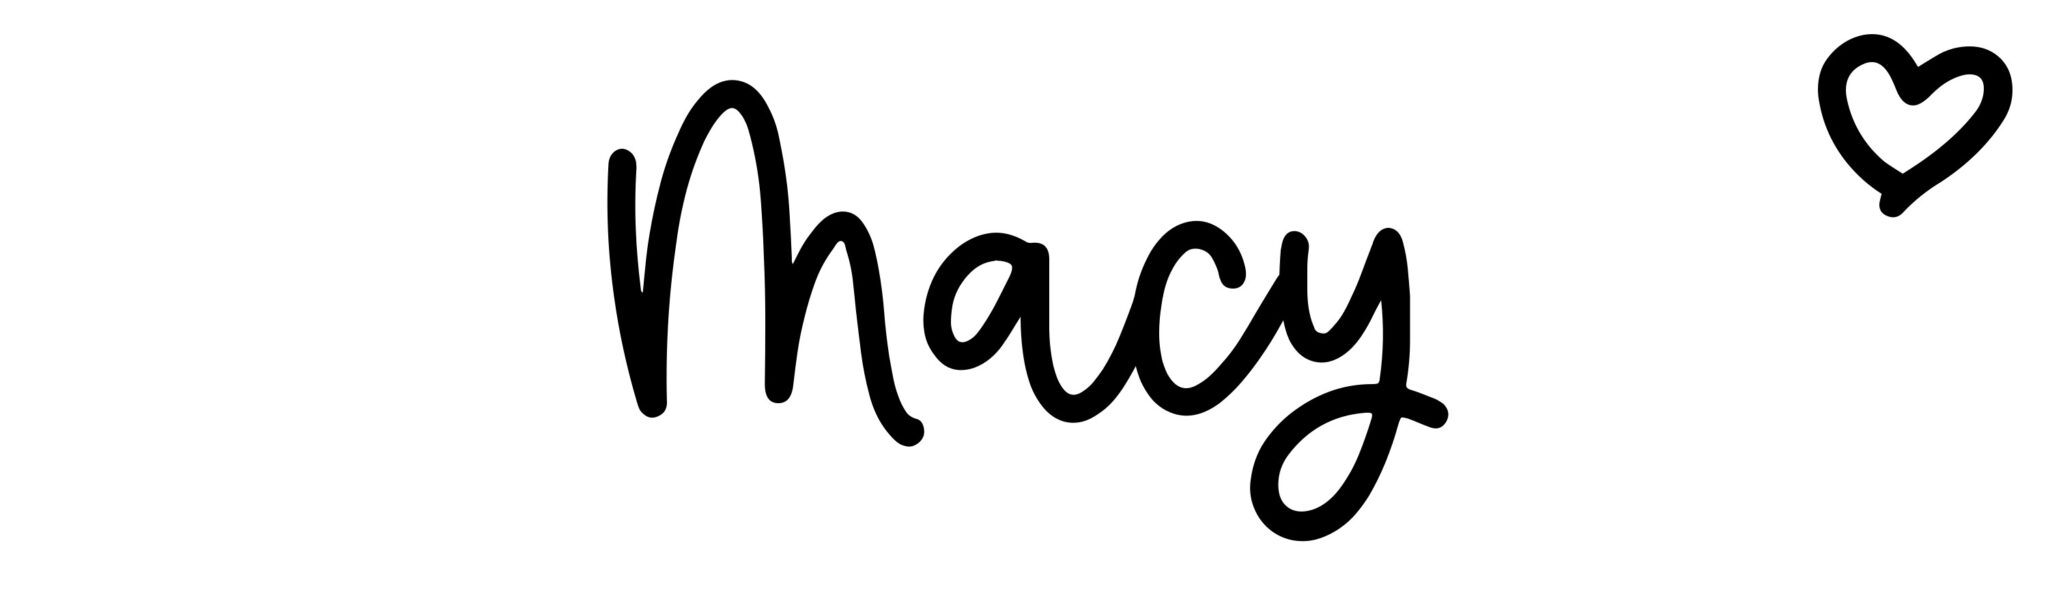 Macy - Name meaning, origin, variations and more